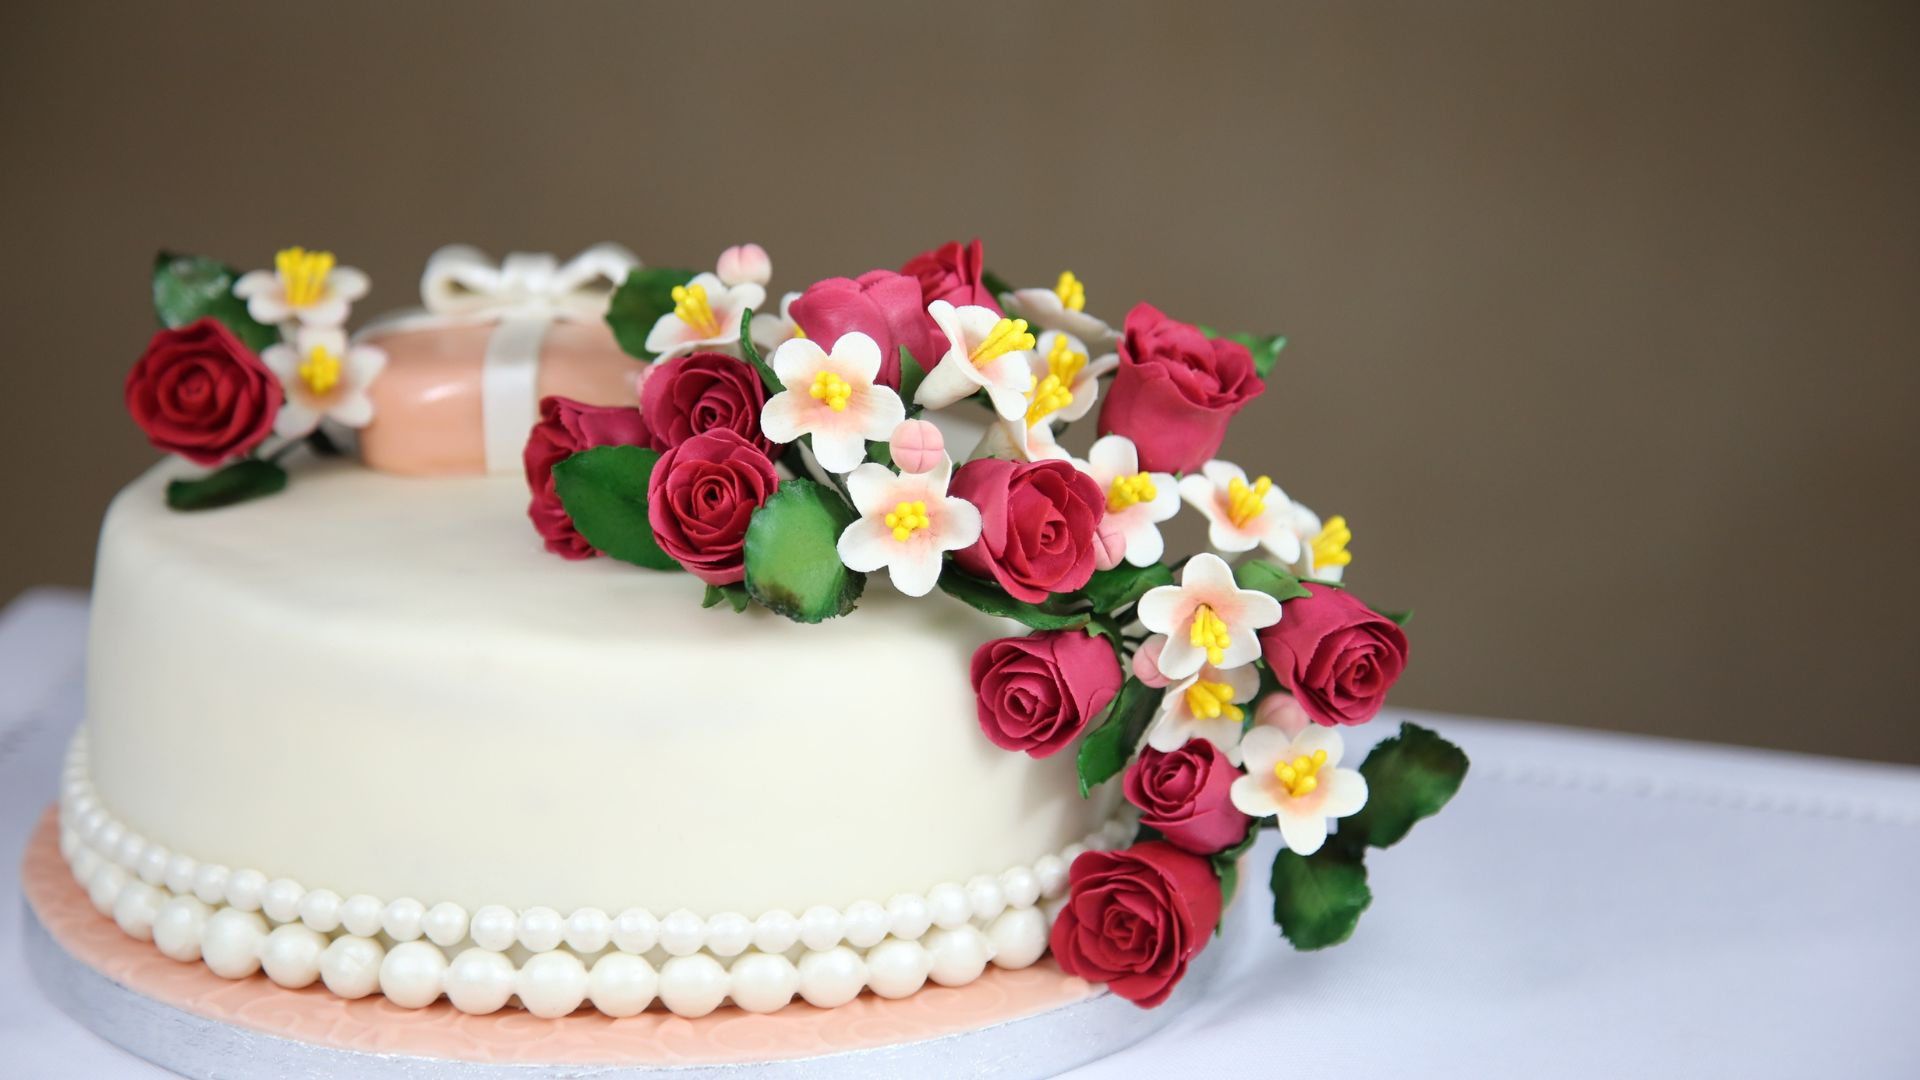 Send cakes to Pune as soon as possible by using the quickest delivery option